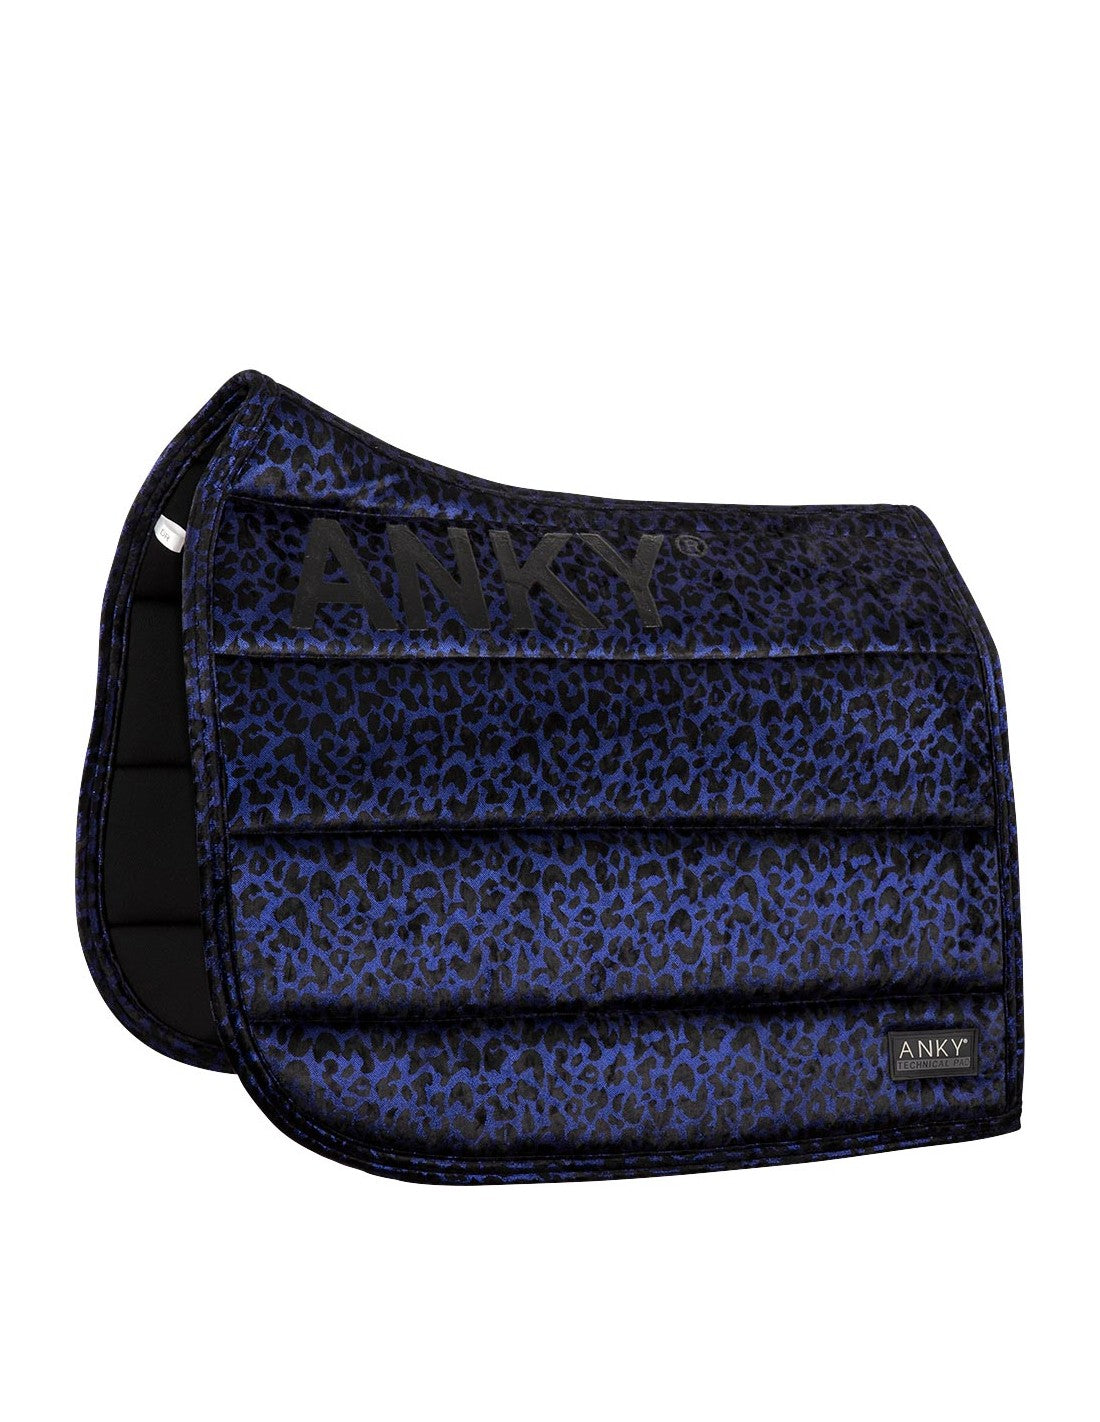 ANKY Saddle Pad Dressage Leopard Print- Blue/Full - Limited Edition